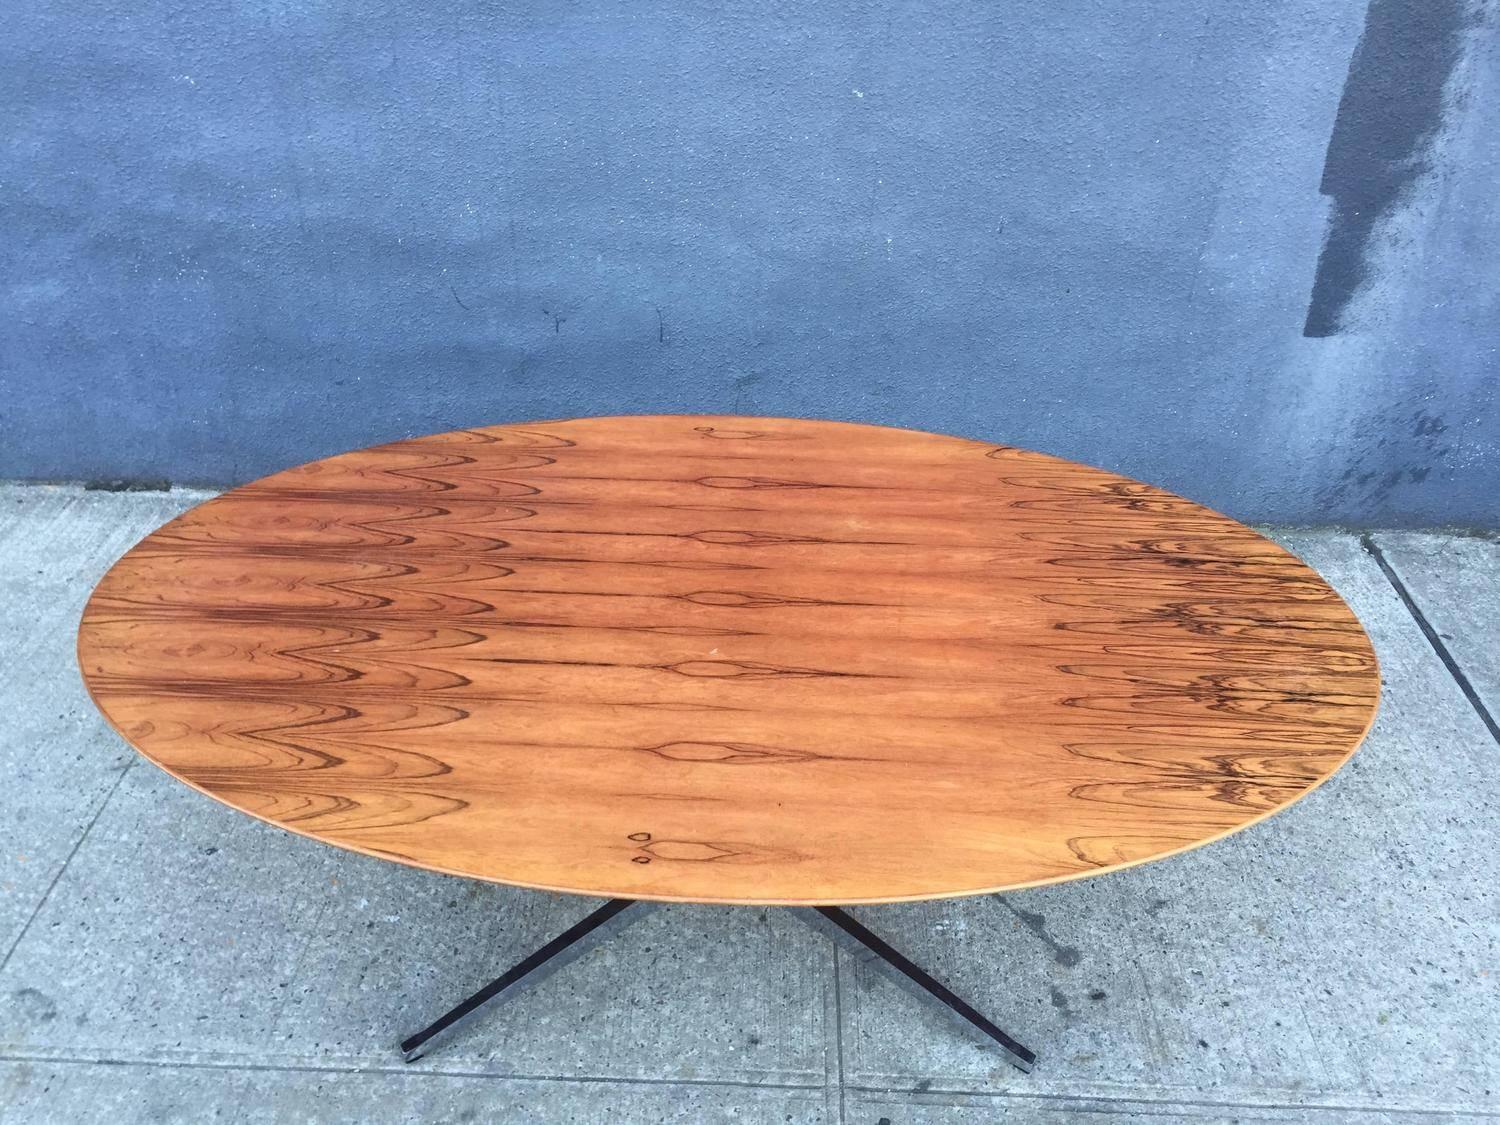 For your consideration is a 78'' Florence Knoll elliptical table / desk in stunning and assertive book matched Brazilian rosewood on a chrome-plated steel base. The piece was originally designed by Knoll as a desk, but can also be used as a table.